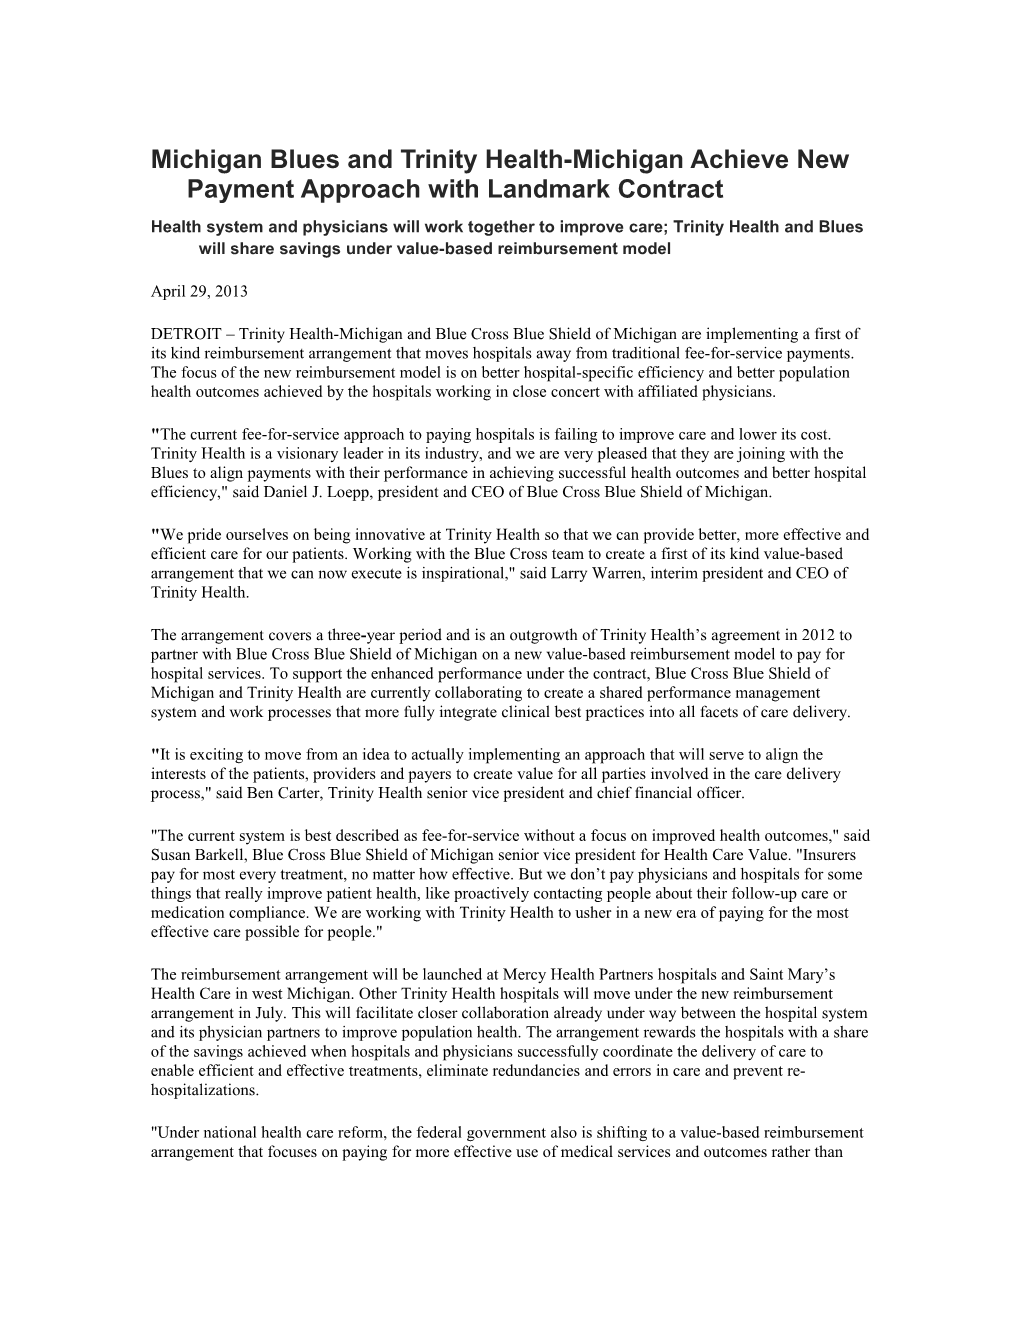 Michigan Blues and Trinity Healthmichigan Achieve New Payment Approach with Landmark Contract